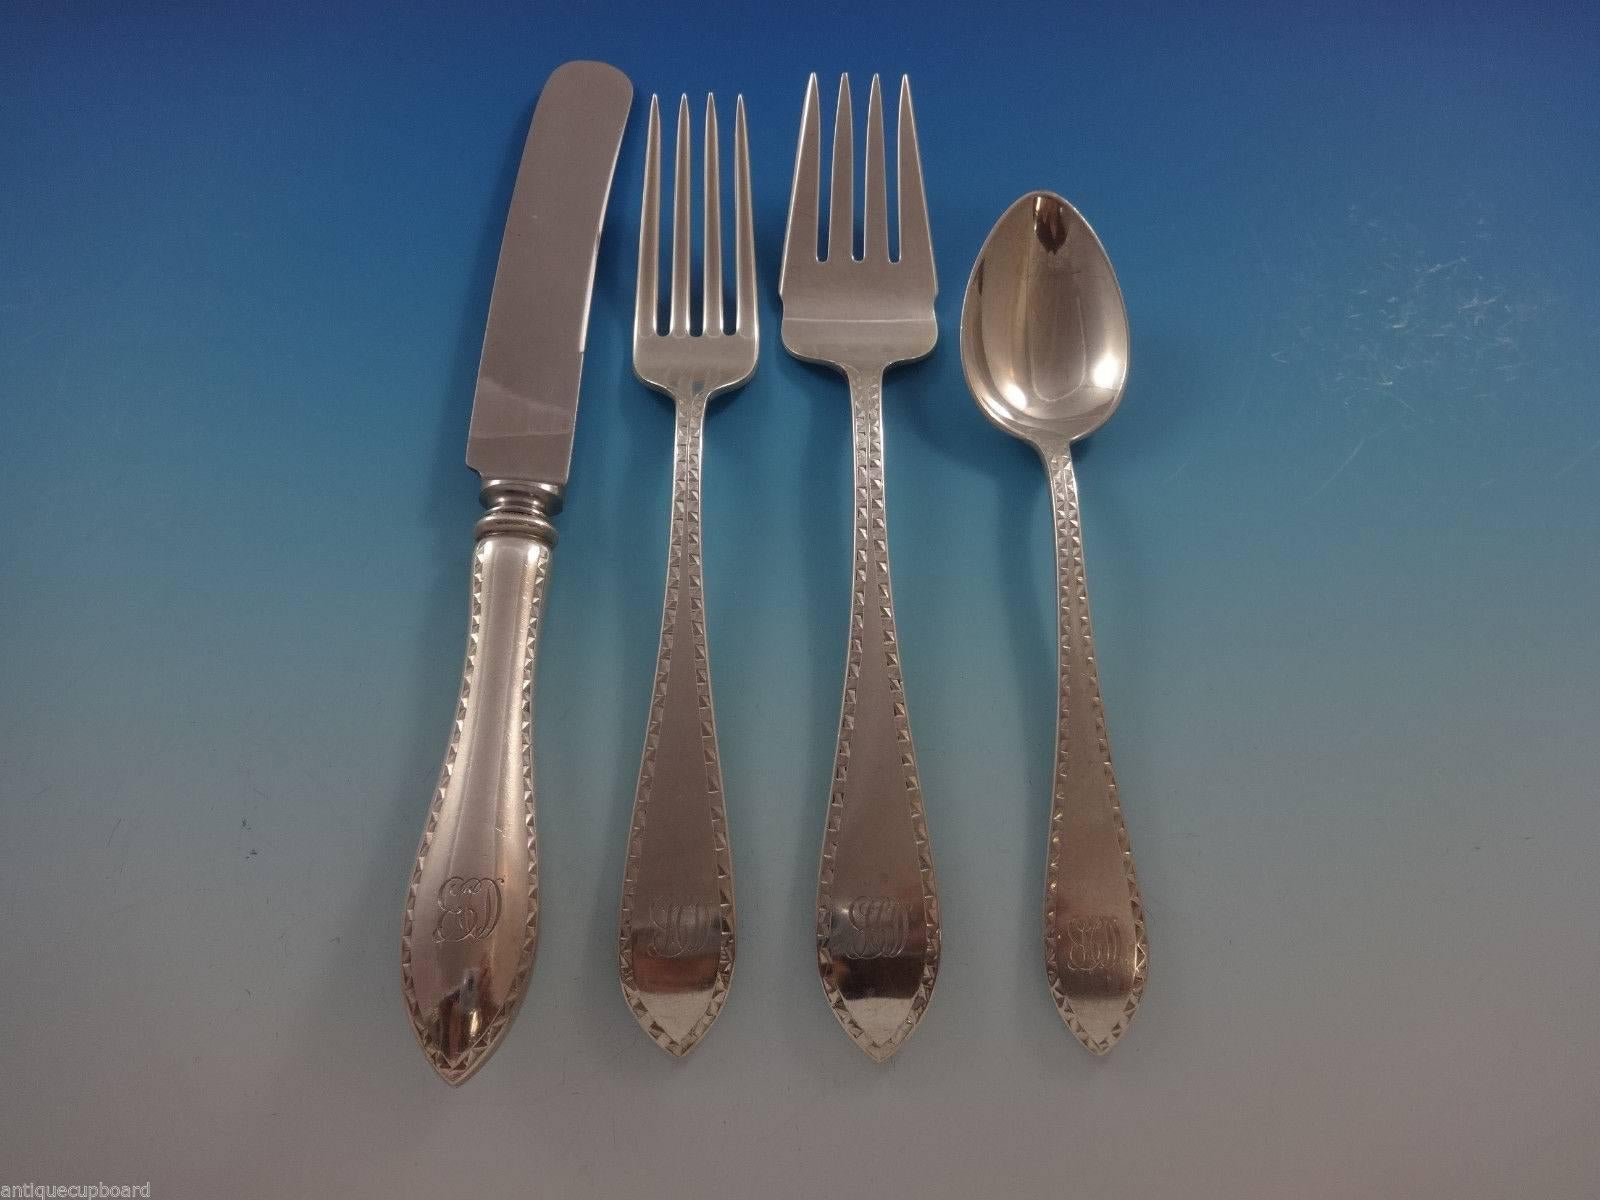 Late 19th Century Pointed Antique Engraved Dominick & Haff Sterling Silver Flatware Service Set For Sale